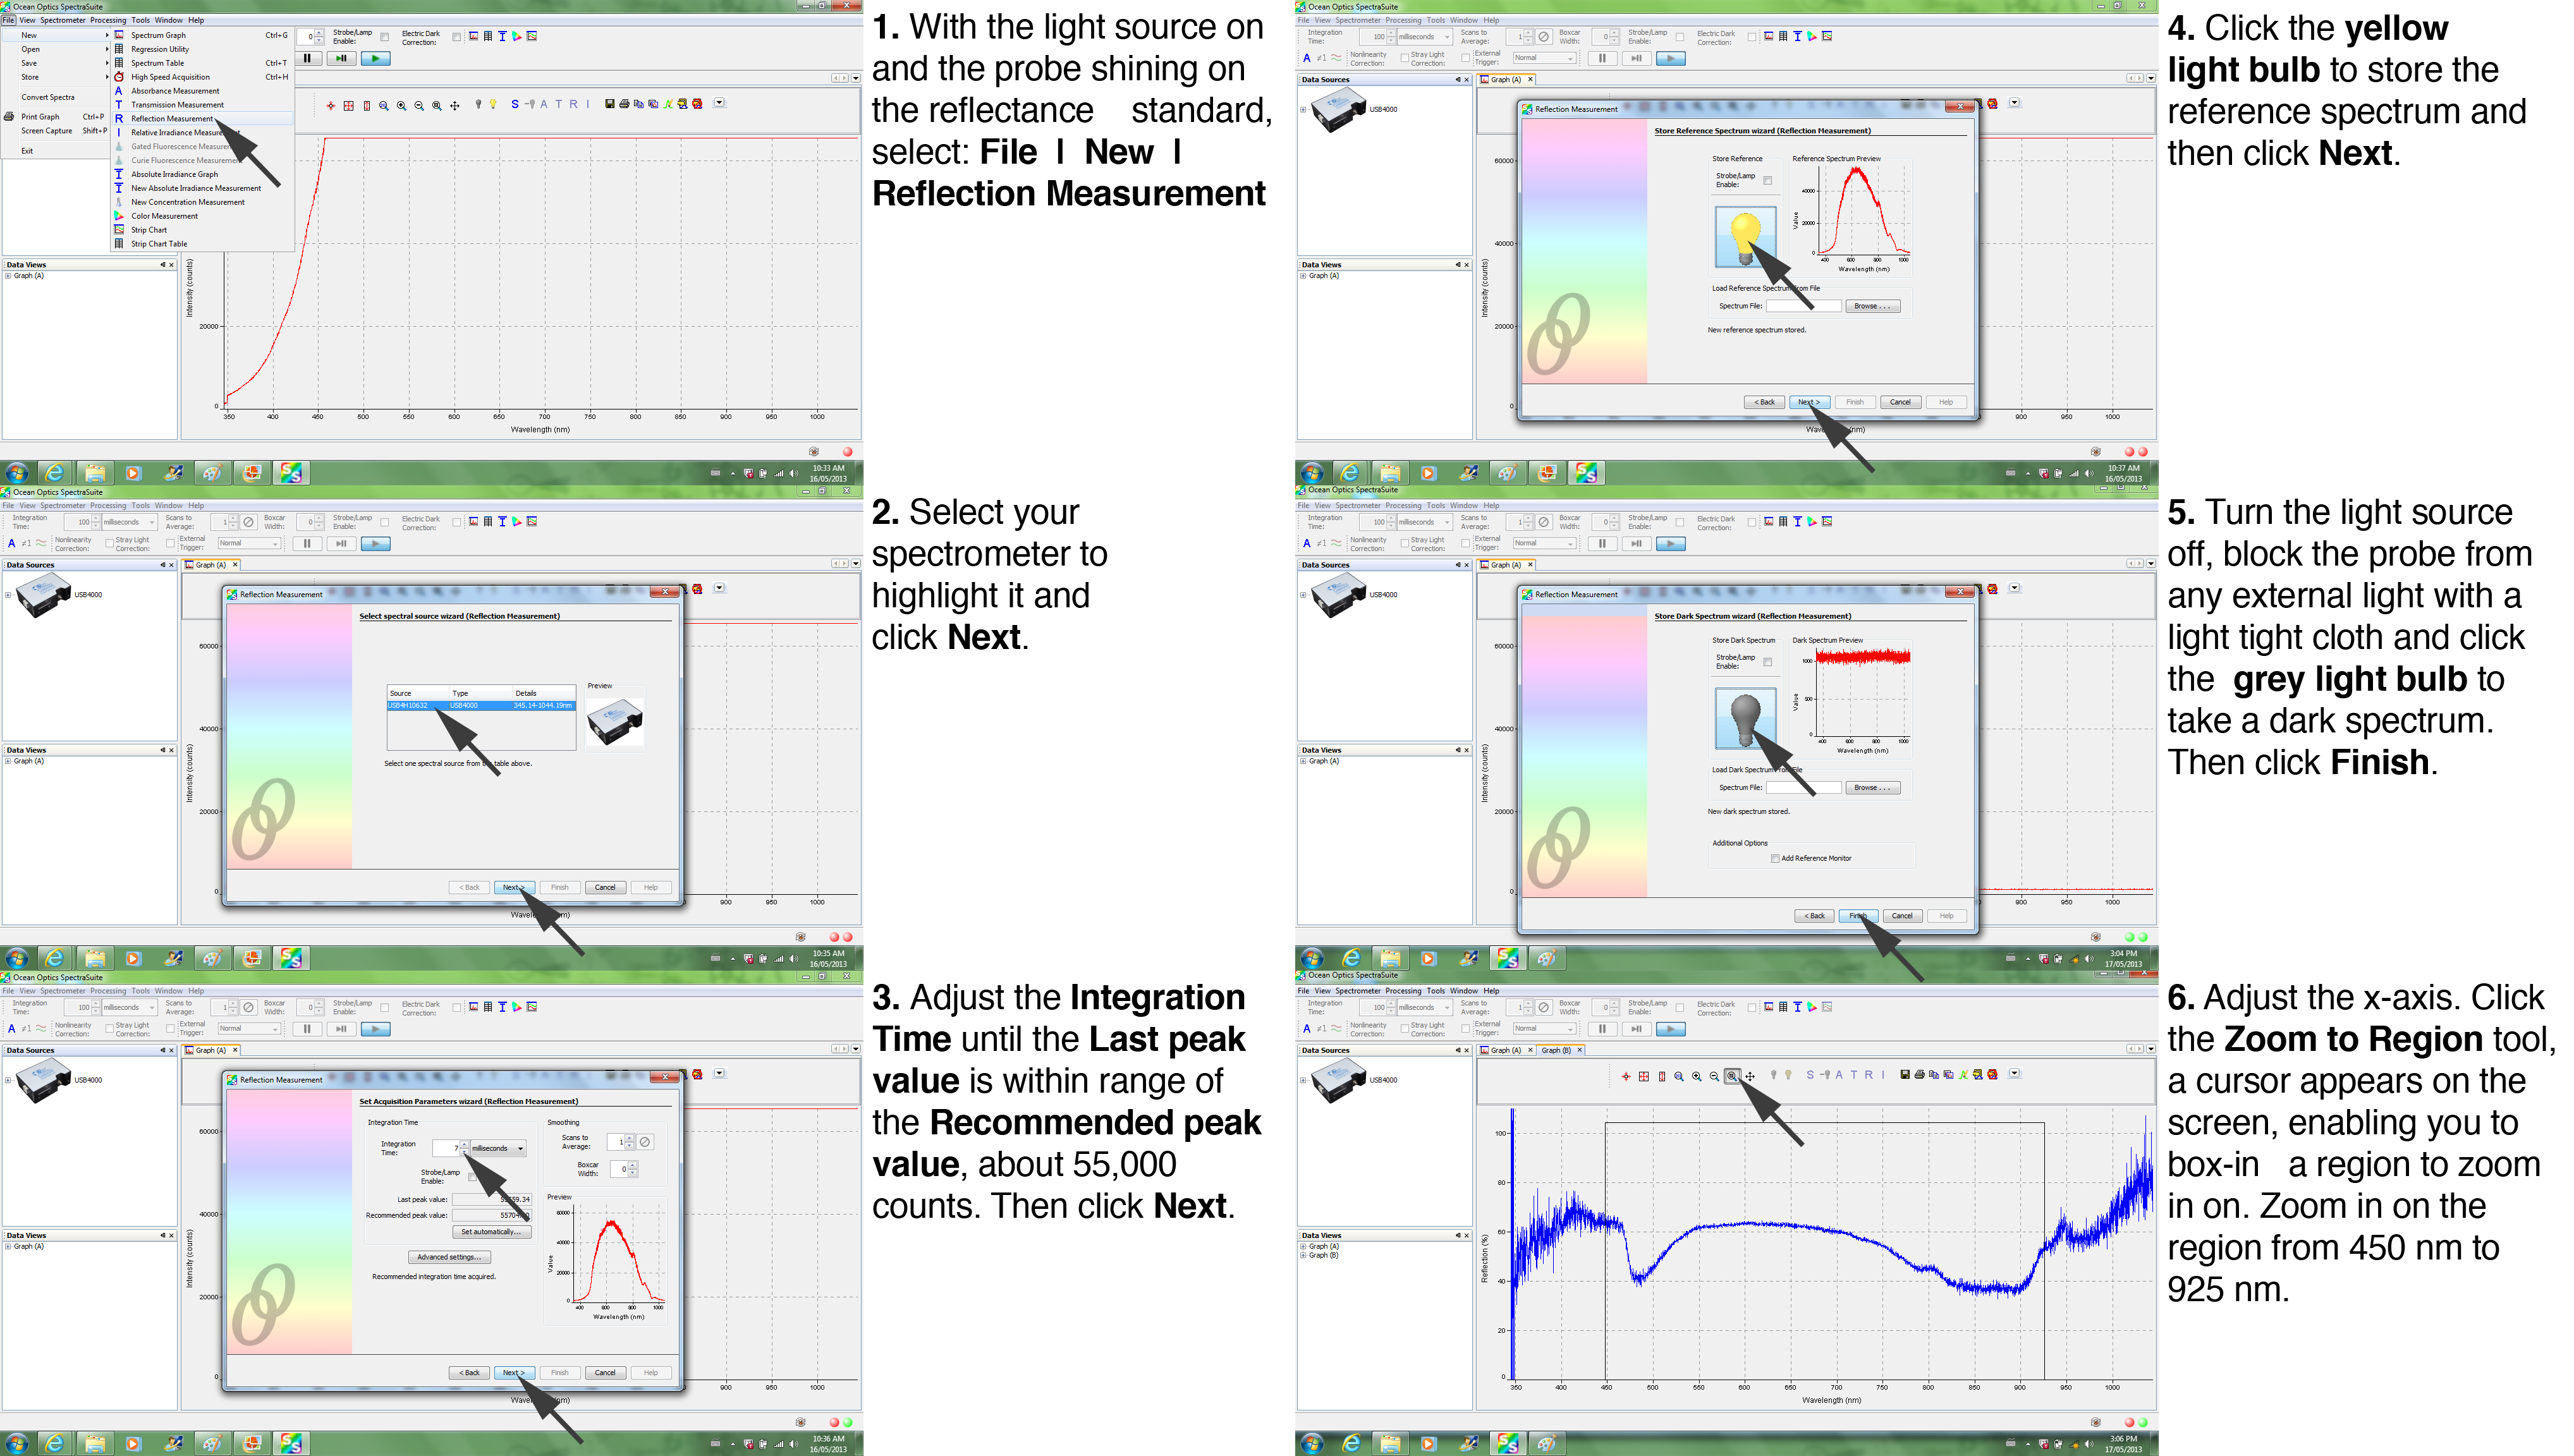 step-by-step screengrabs showing how to calibrate the SpectraSuite software